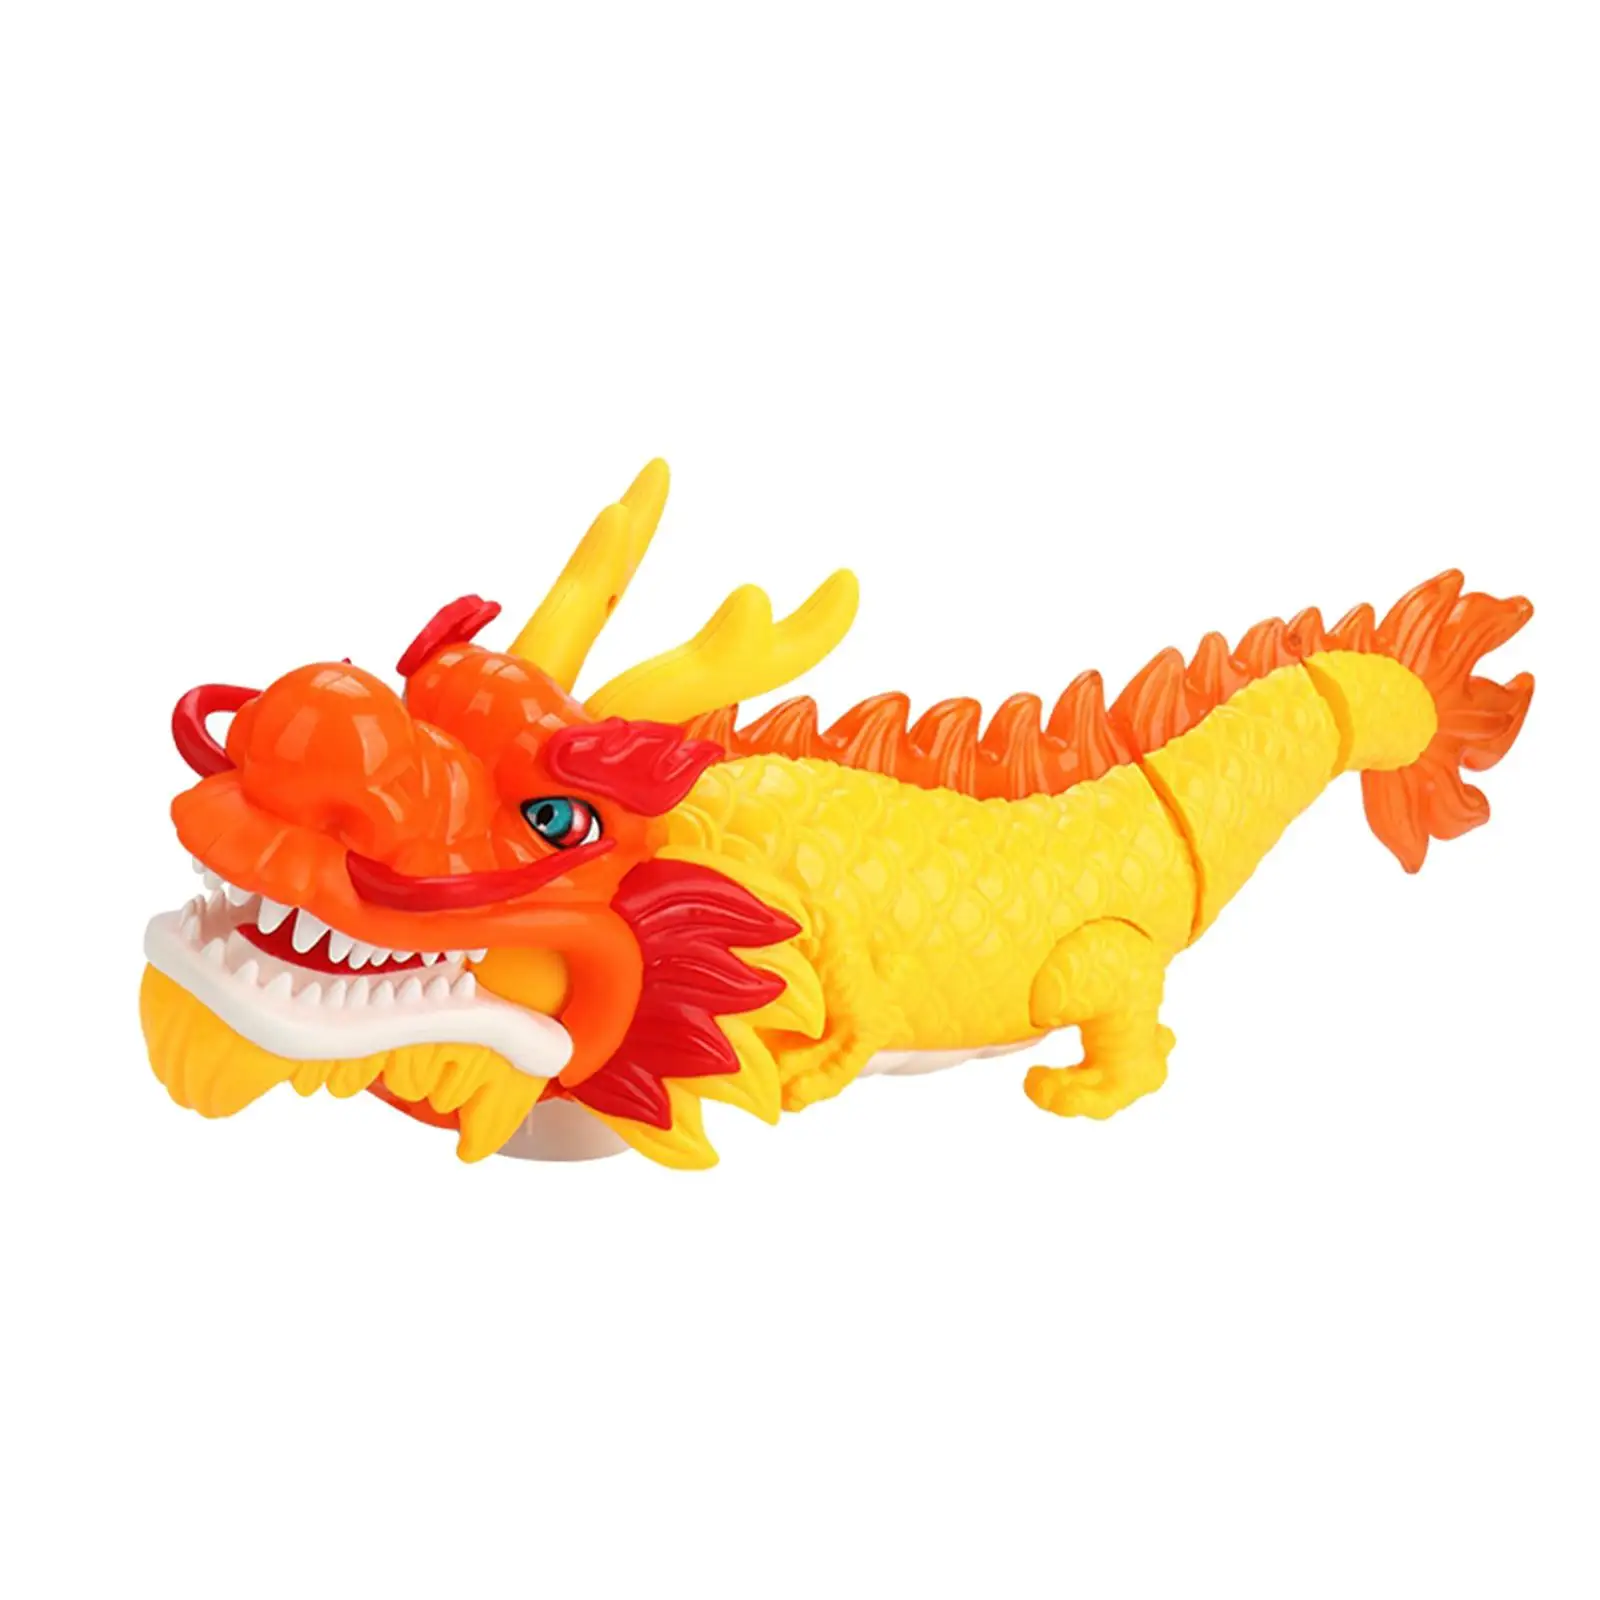 Eletric Dragon Toy Creative Dragon Toy Gifts Outdoor Infant Toy Crawling Toy for Girls Kid Adults Boys 4 5 6 7 8 9 Year Olds